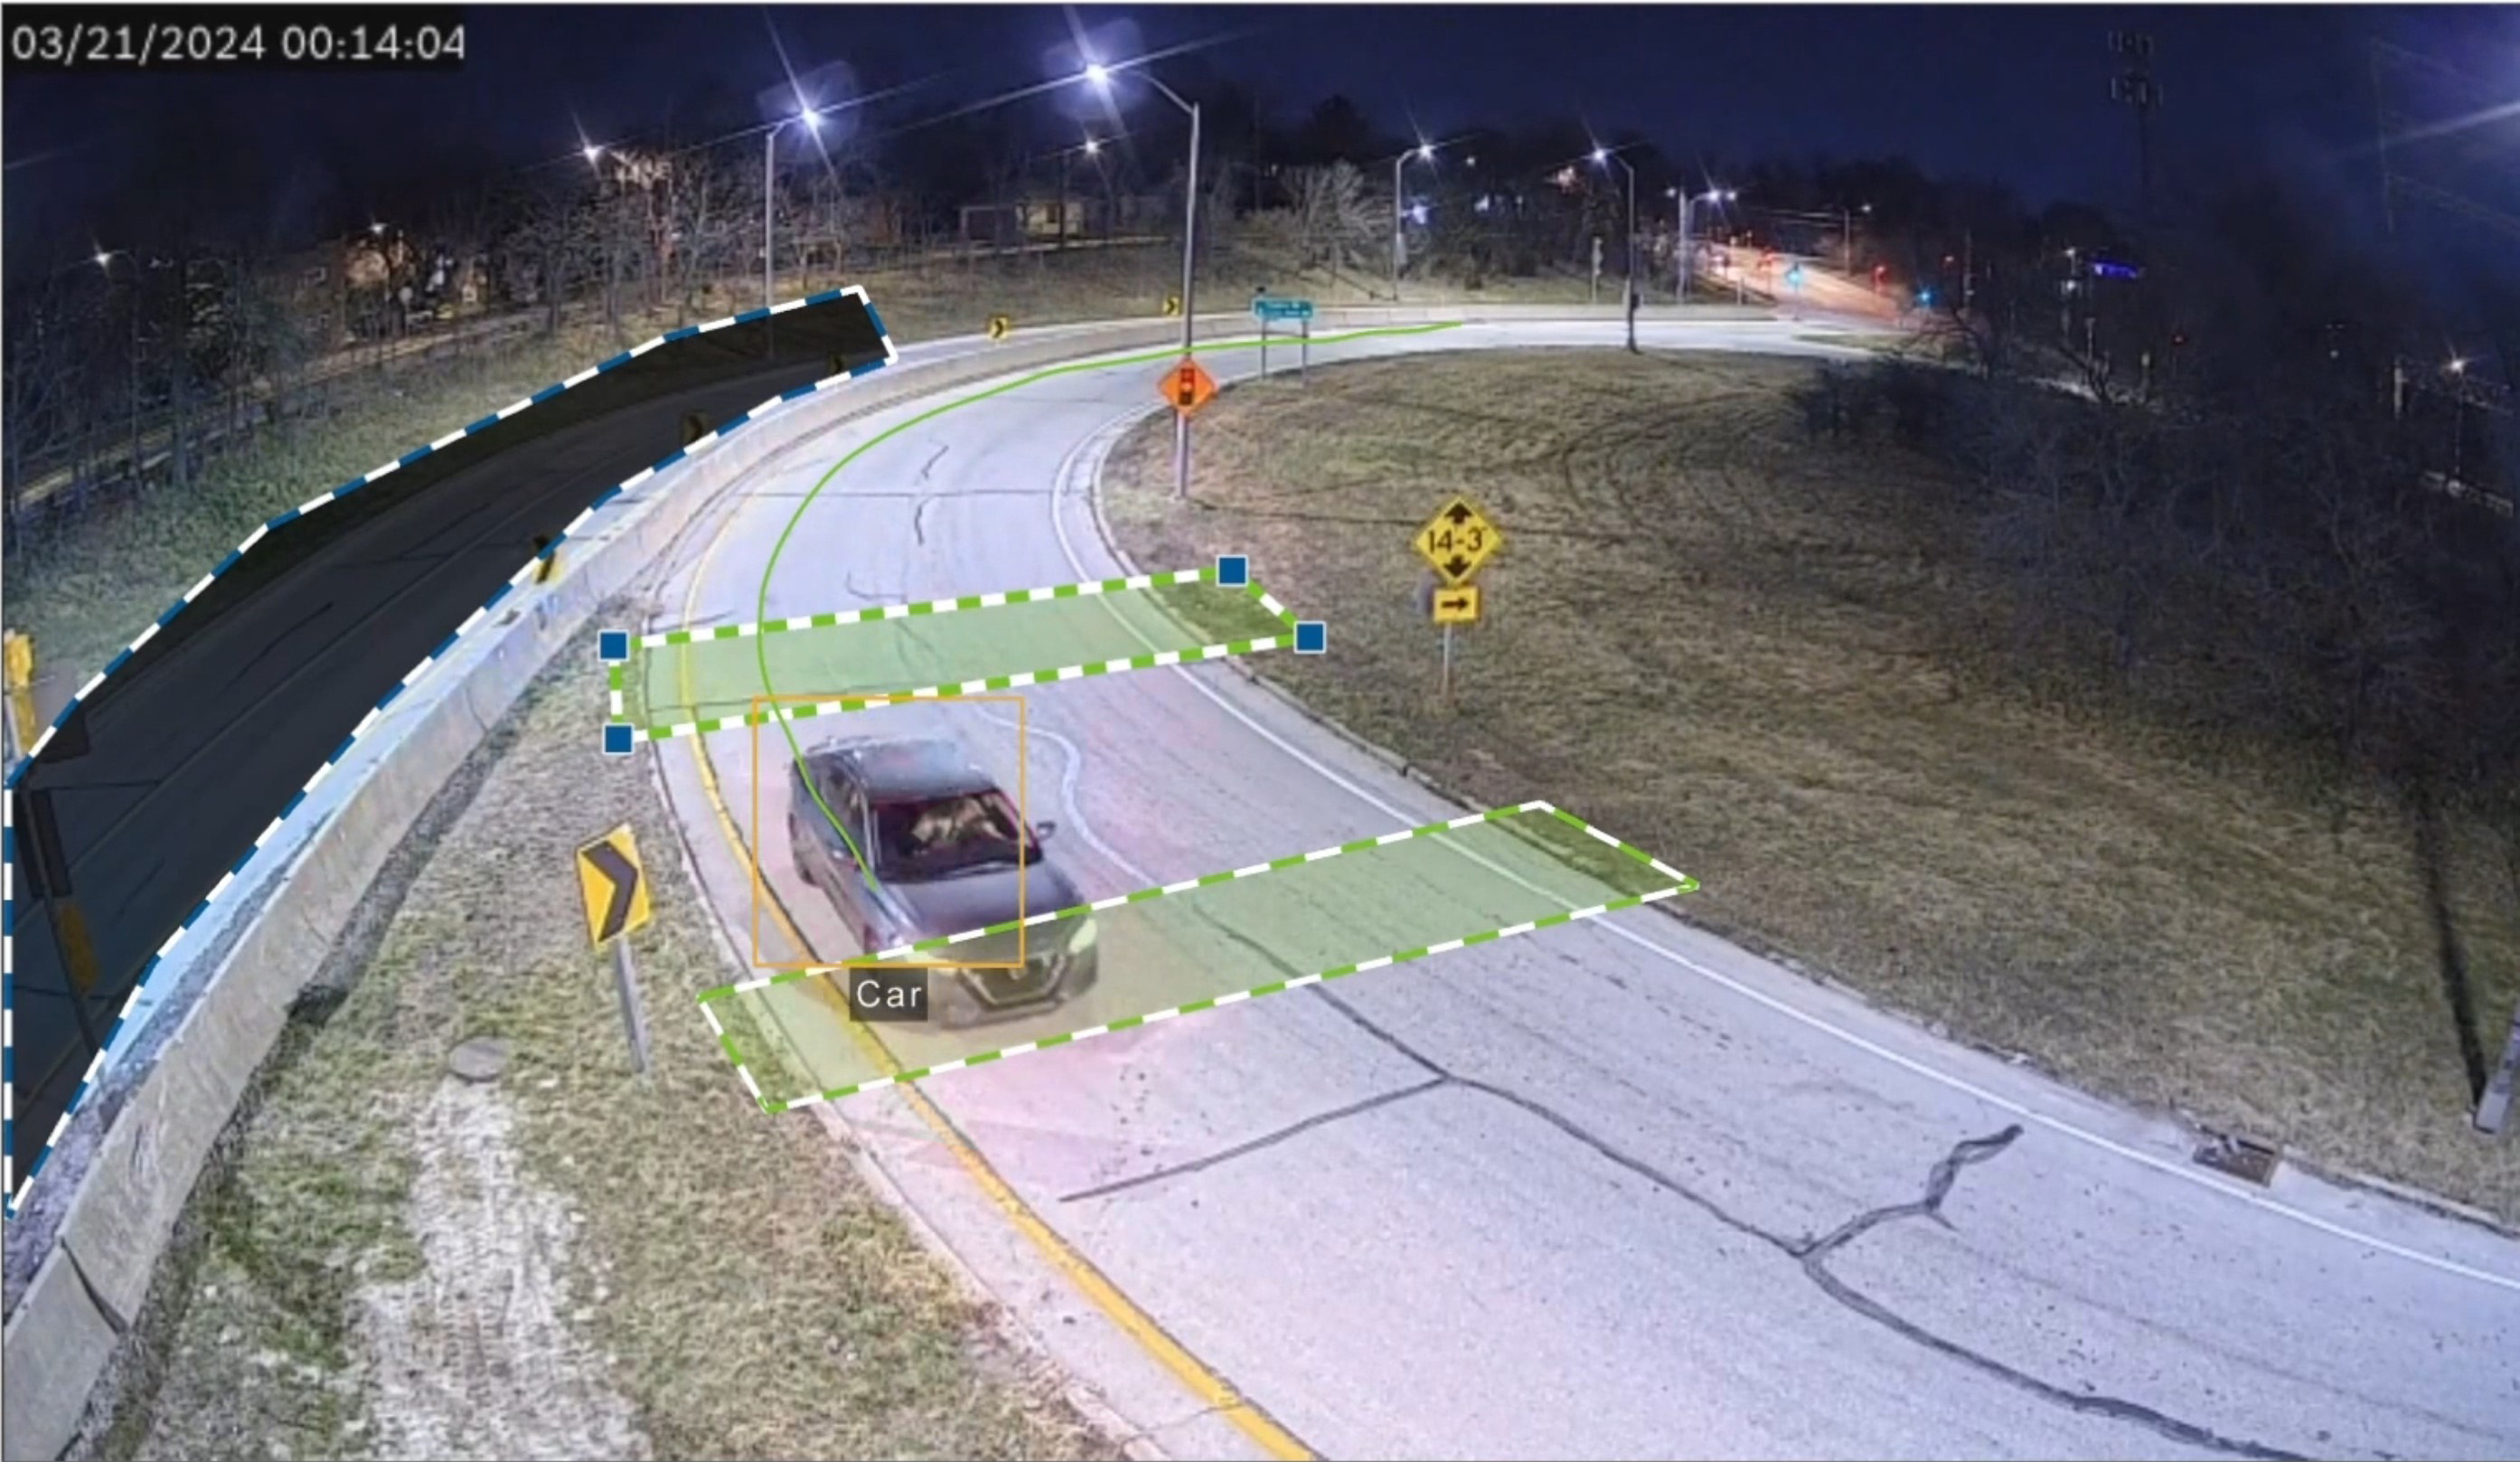 Image taken from TAPCO's Wrong-Way Alert System, powered by Bosch, showing different vehicle categorization.